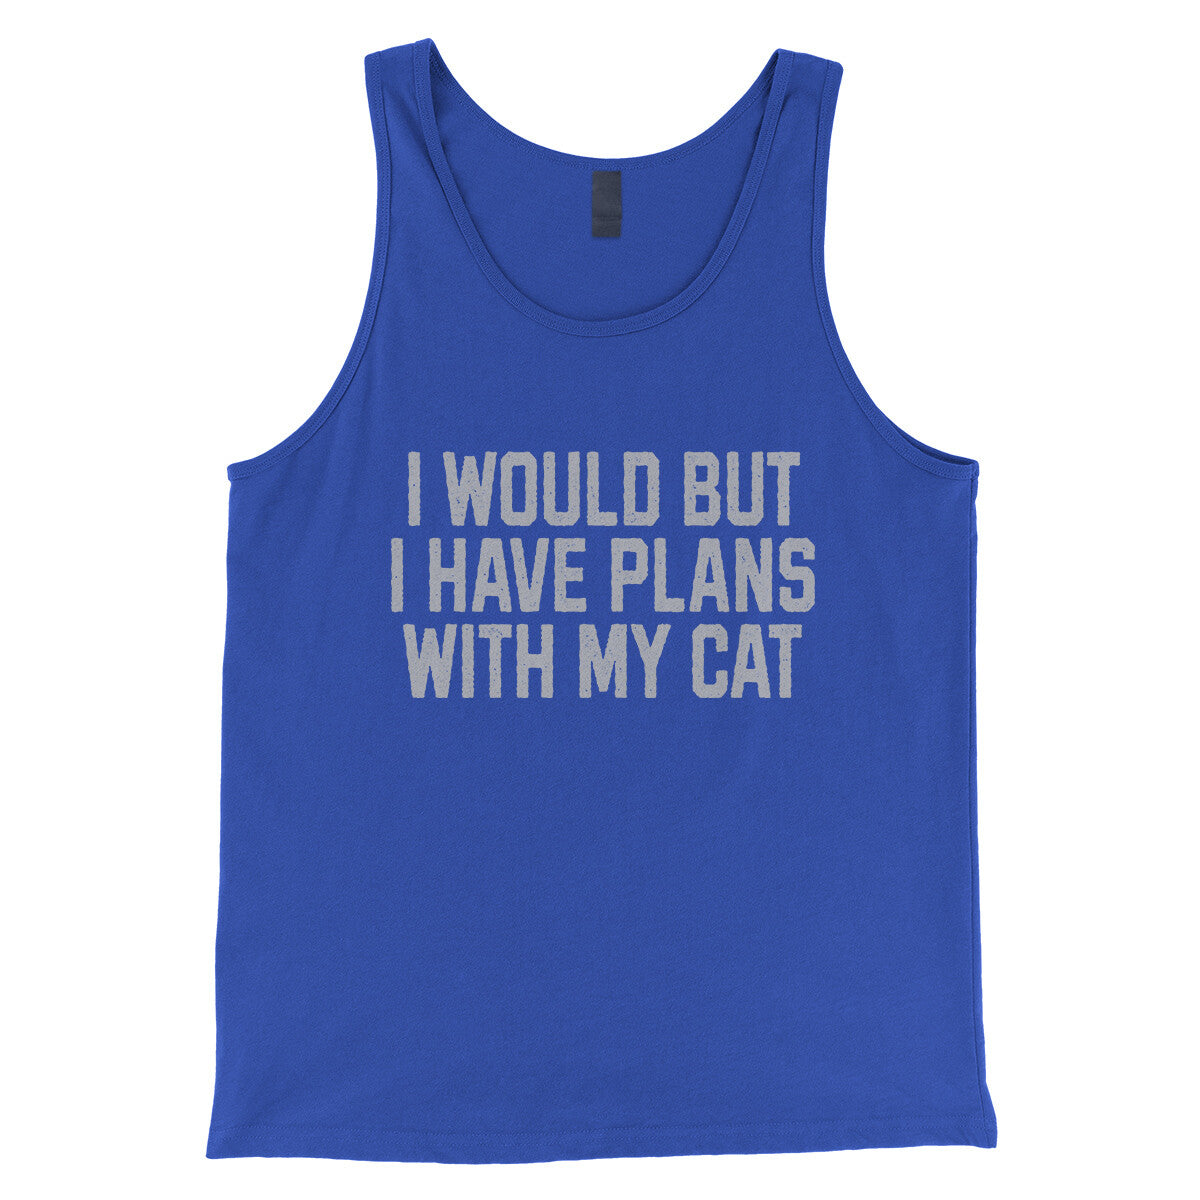 I Would but I Have Plans with My Cat in True Royal Color